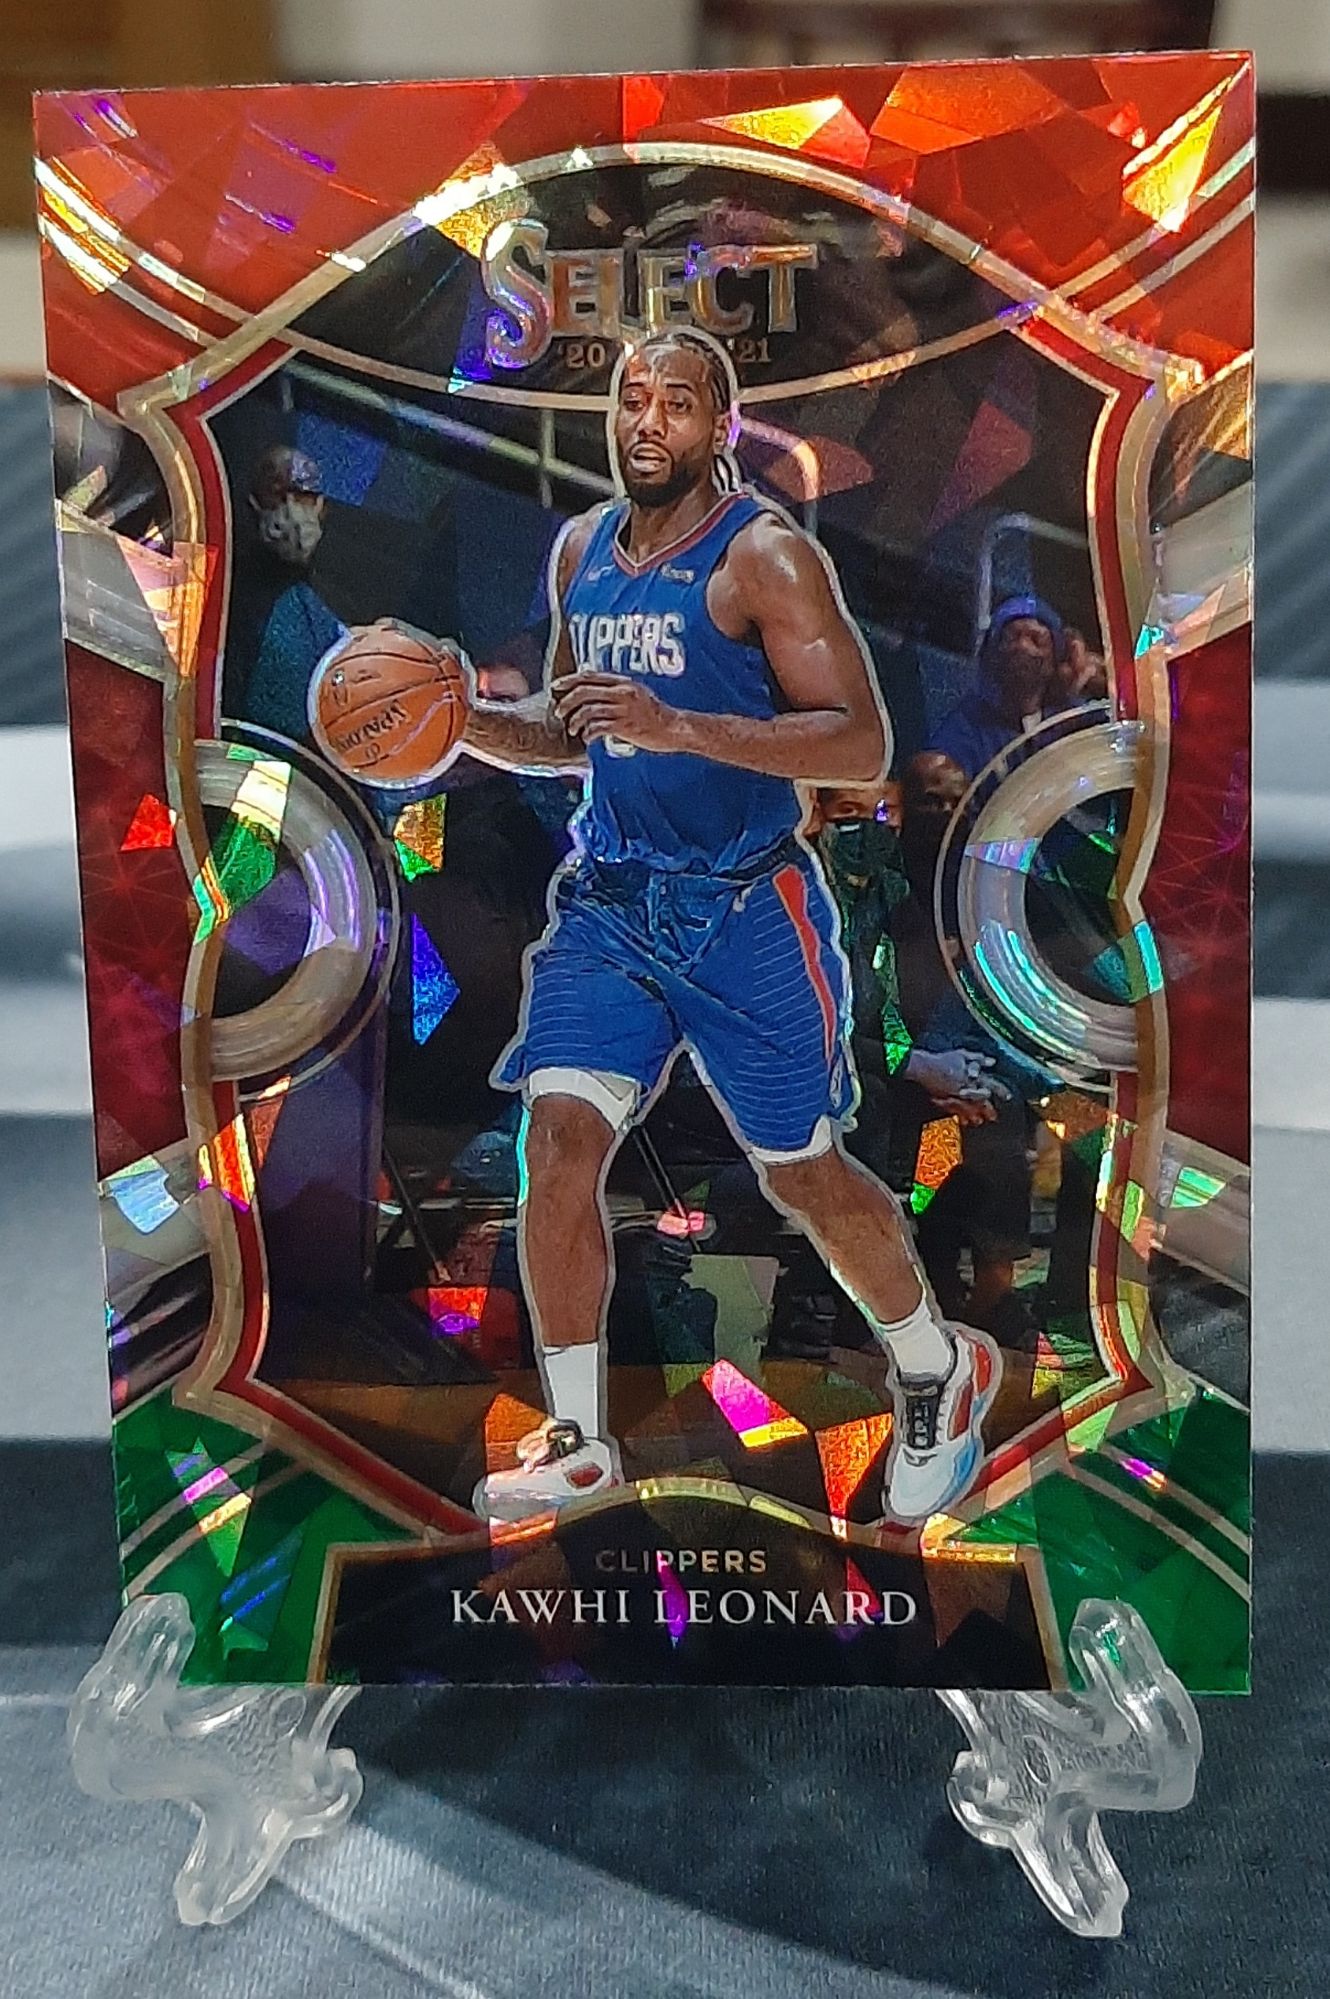 Kawhi Leonard 2020-21 Select CONCOURSE RED WHITE GREEN CRACKED ICE PRIZM Card 37 